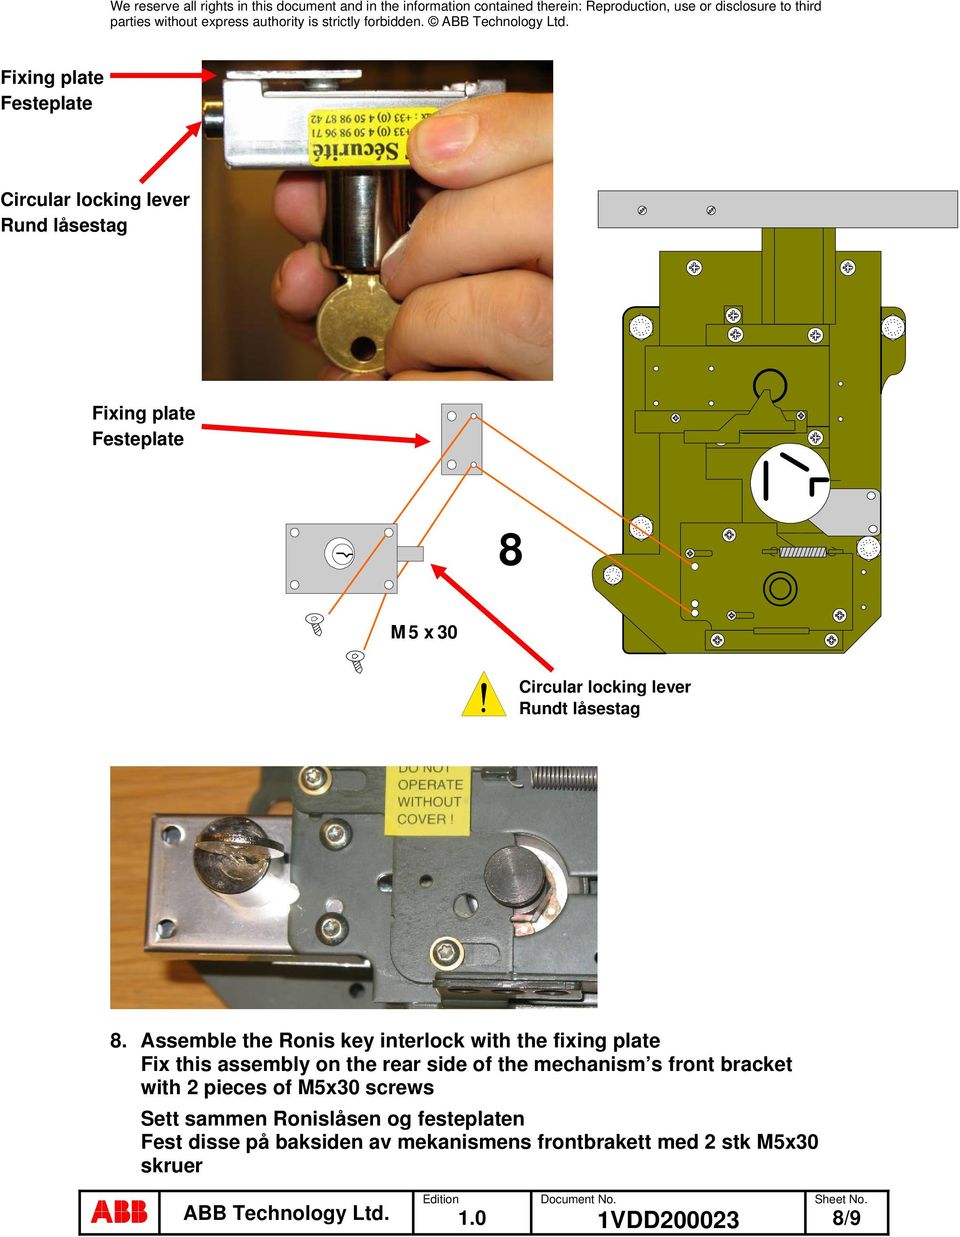 Assemble the Ronis key interlock with the fixing plate Fix this assembly on the rear side of the